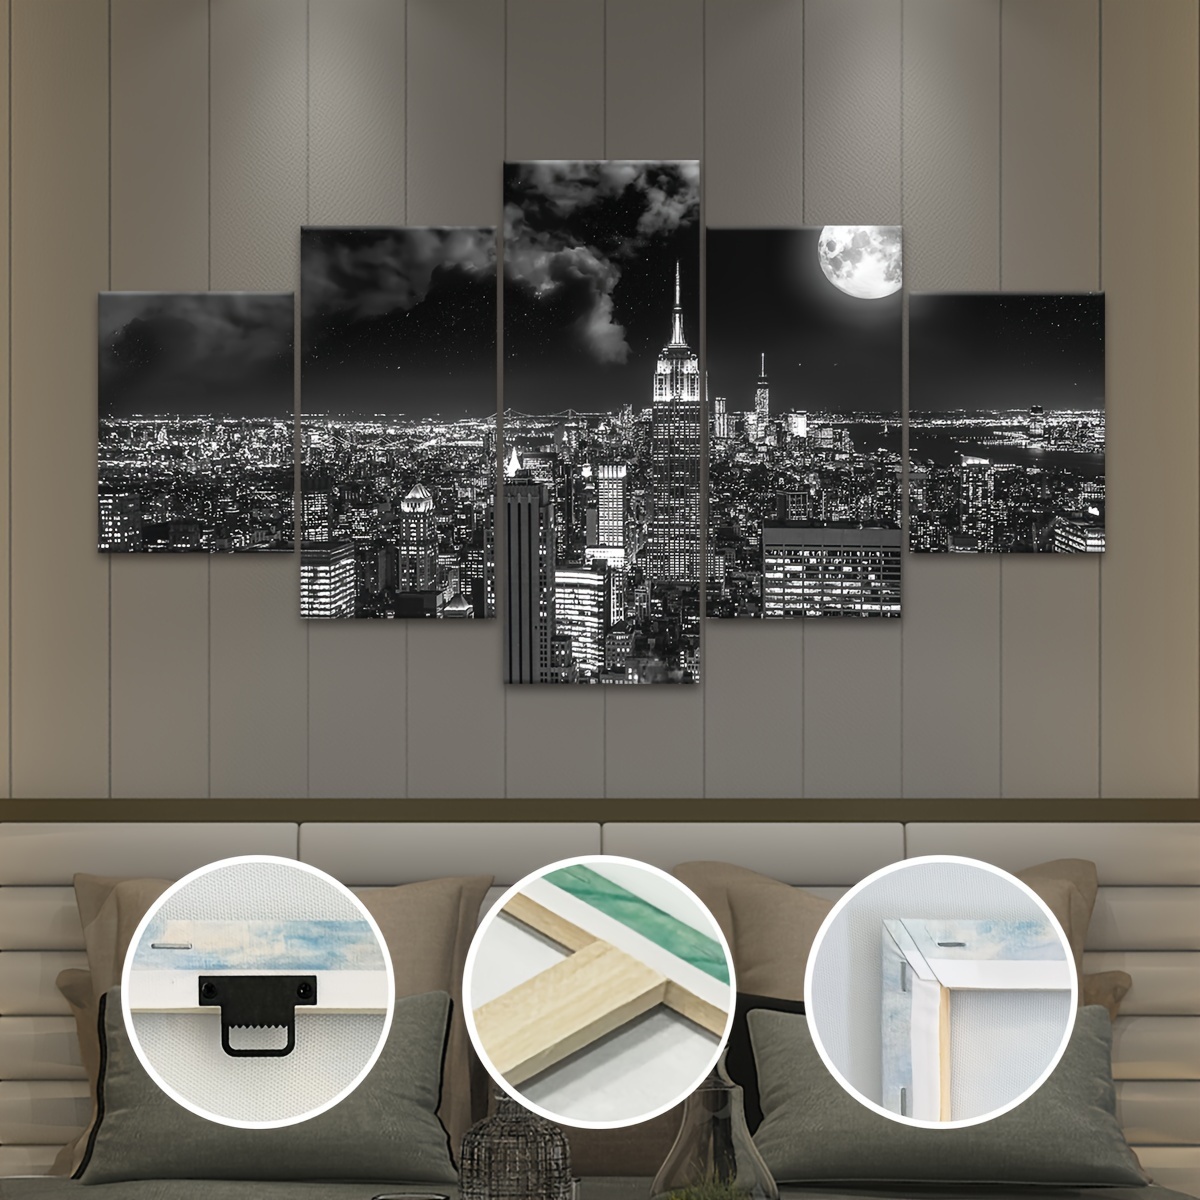 

5pcs Framed Canvas Poster, Black & White Cityscape Painting, Canvas Wall Art, Artwork Wall Painting For Gift, Bedroom, Office, Living Room, Cafe, Bar, Wall Decor, Home And Dormitory Decoration